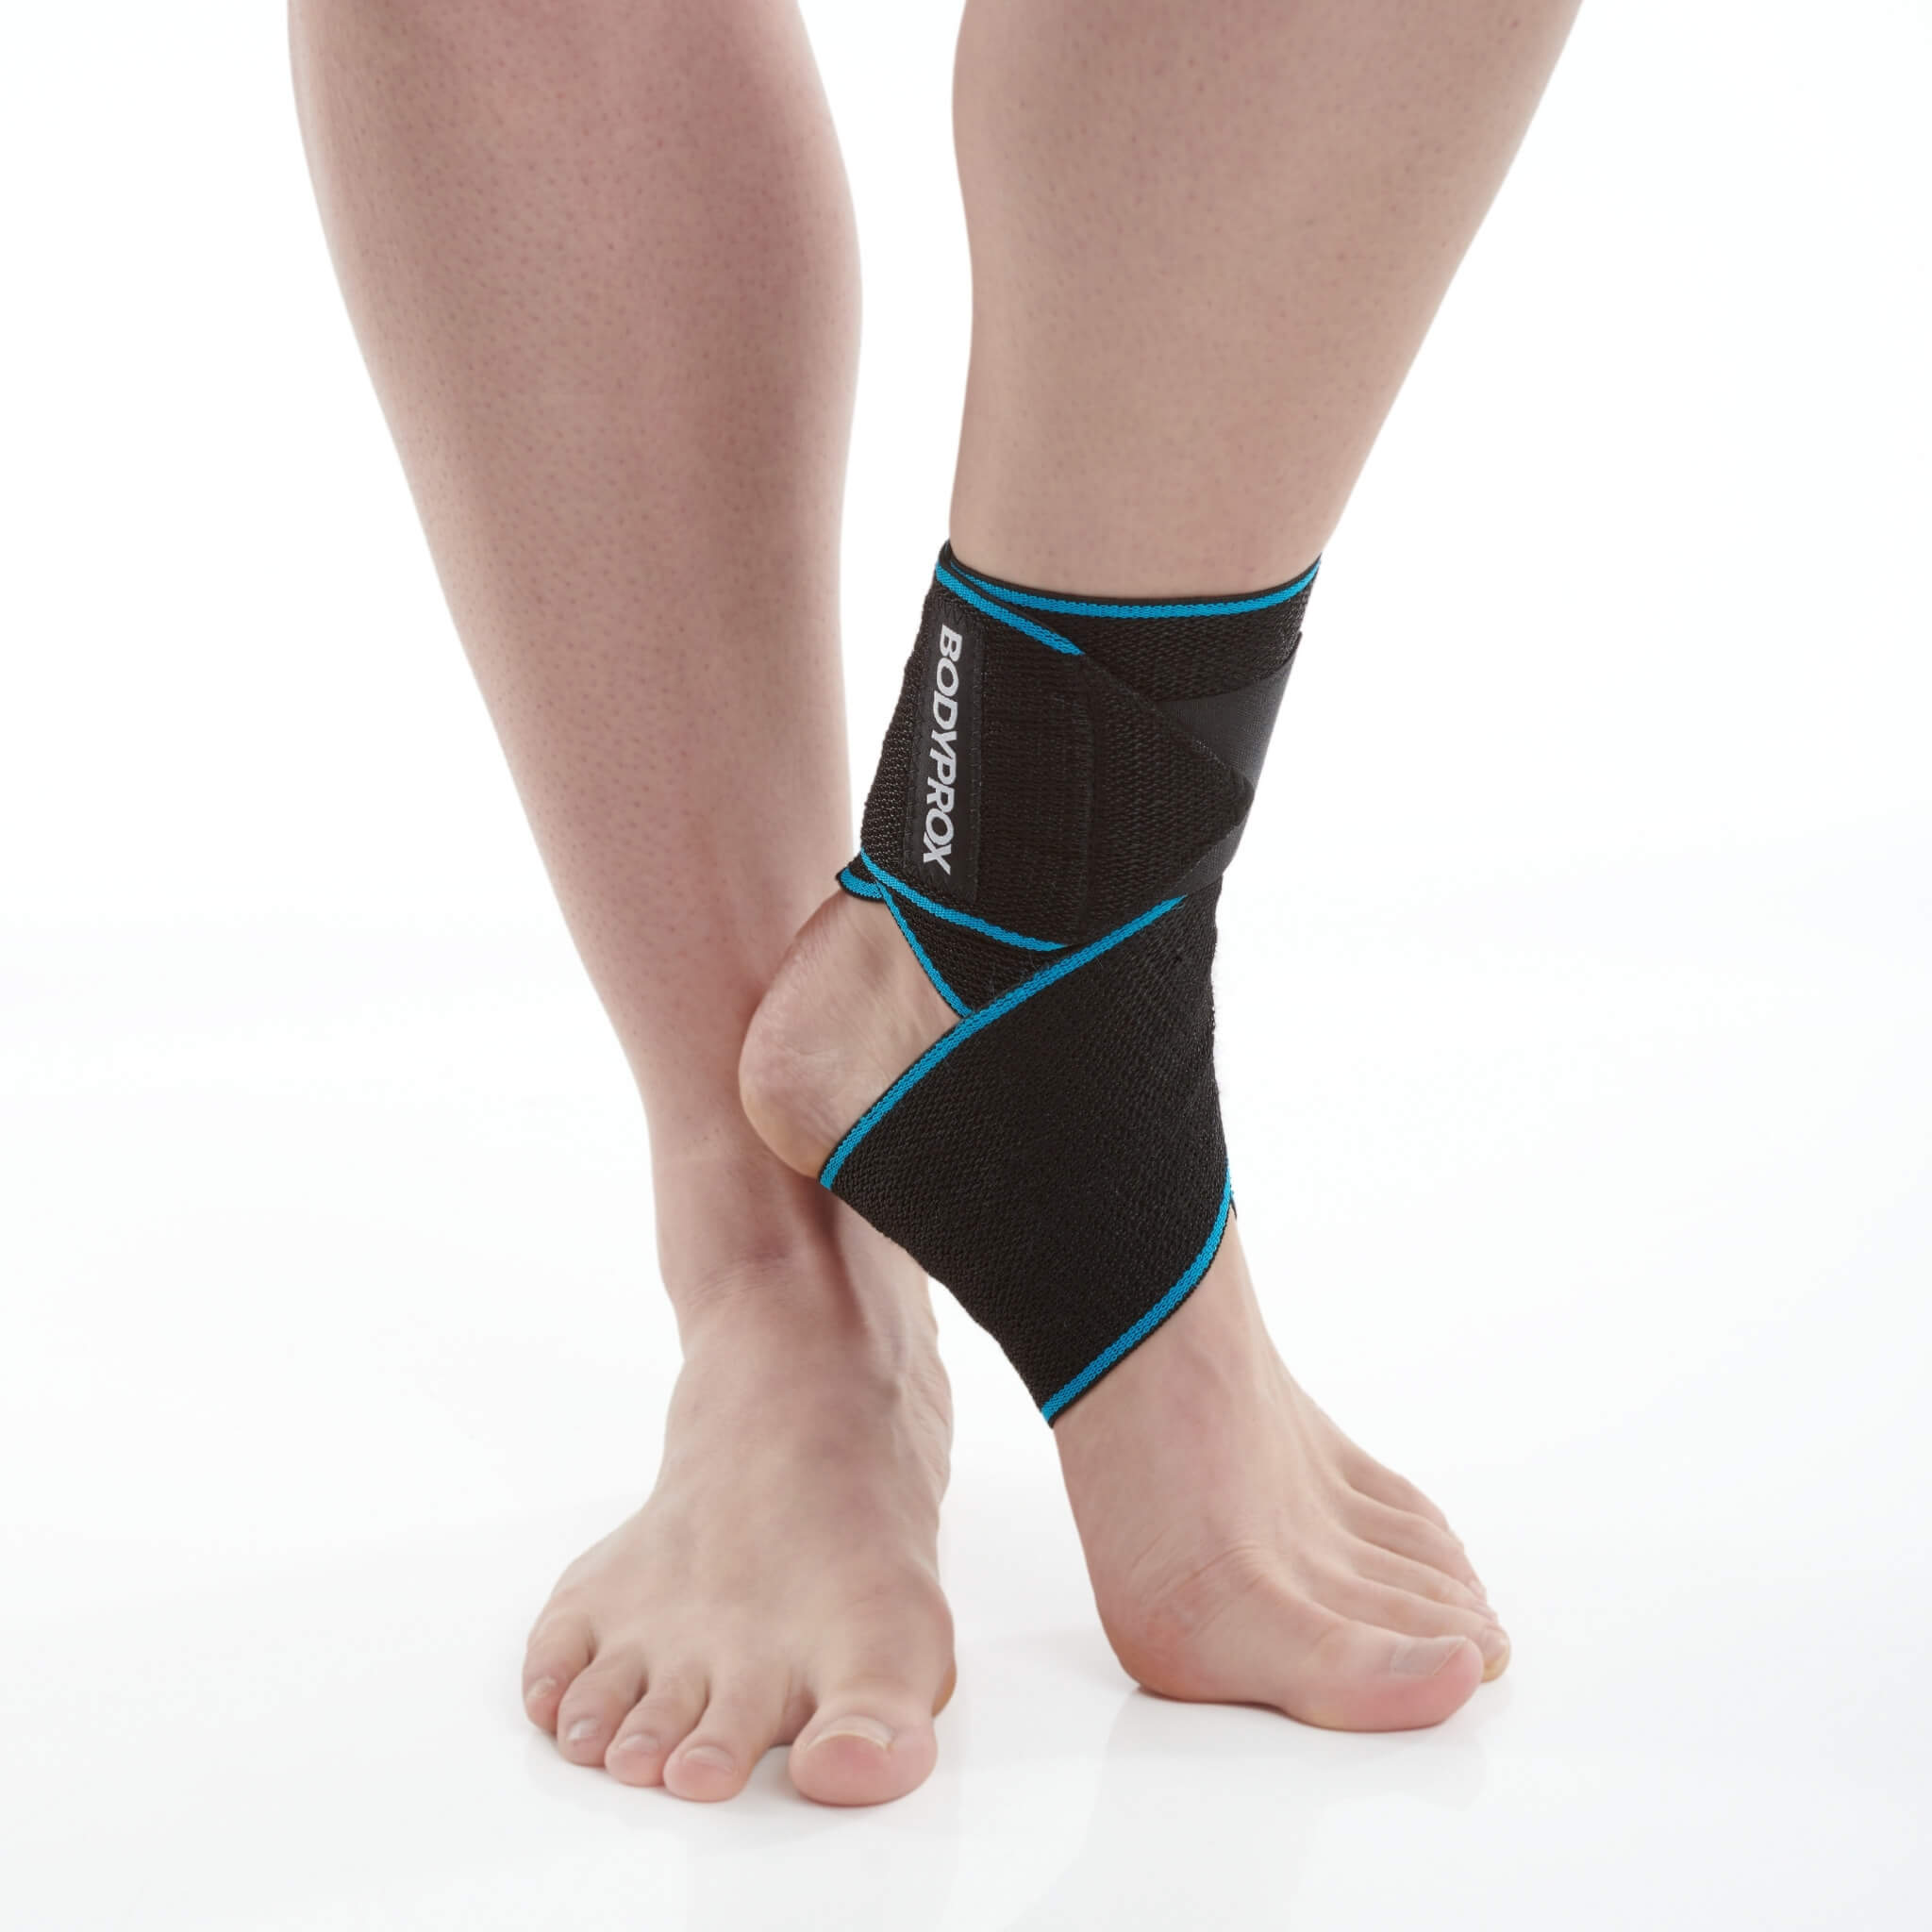 Ossur Formfit Lace Up Ankle Brace - Injury/Sprain Support - Simply Medical